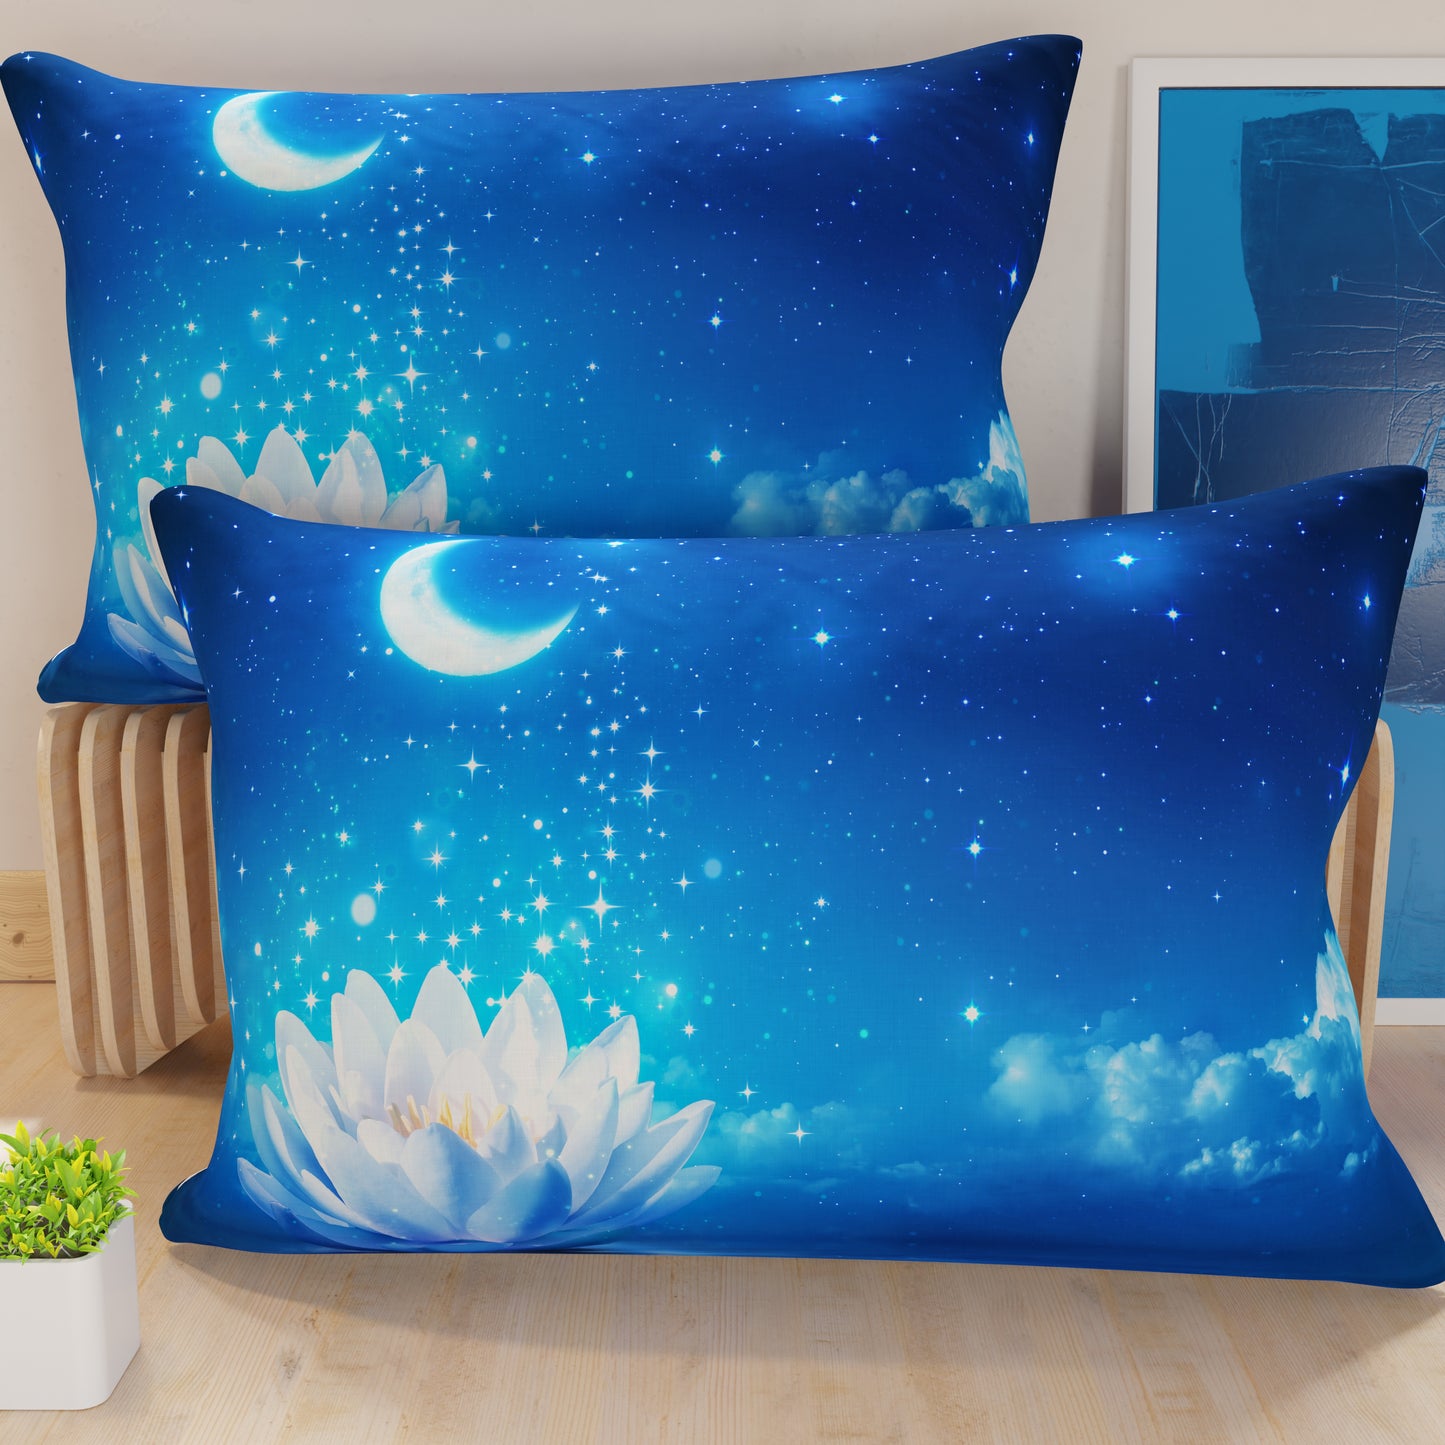 Pillowcases, Cushion Covers in Digital Print, Starry Night